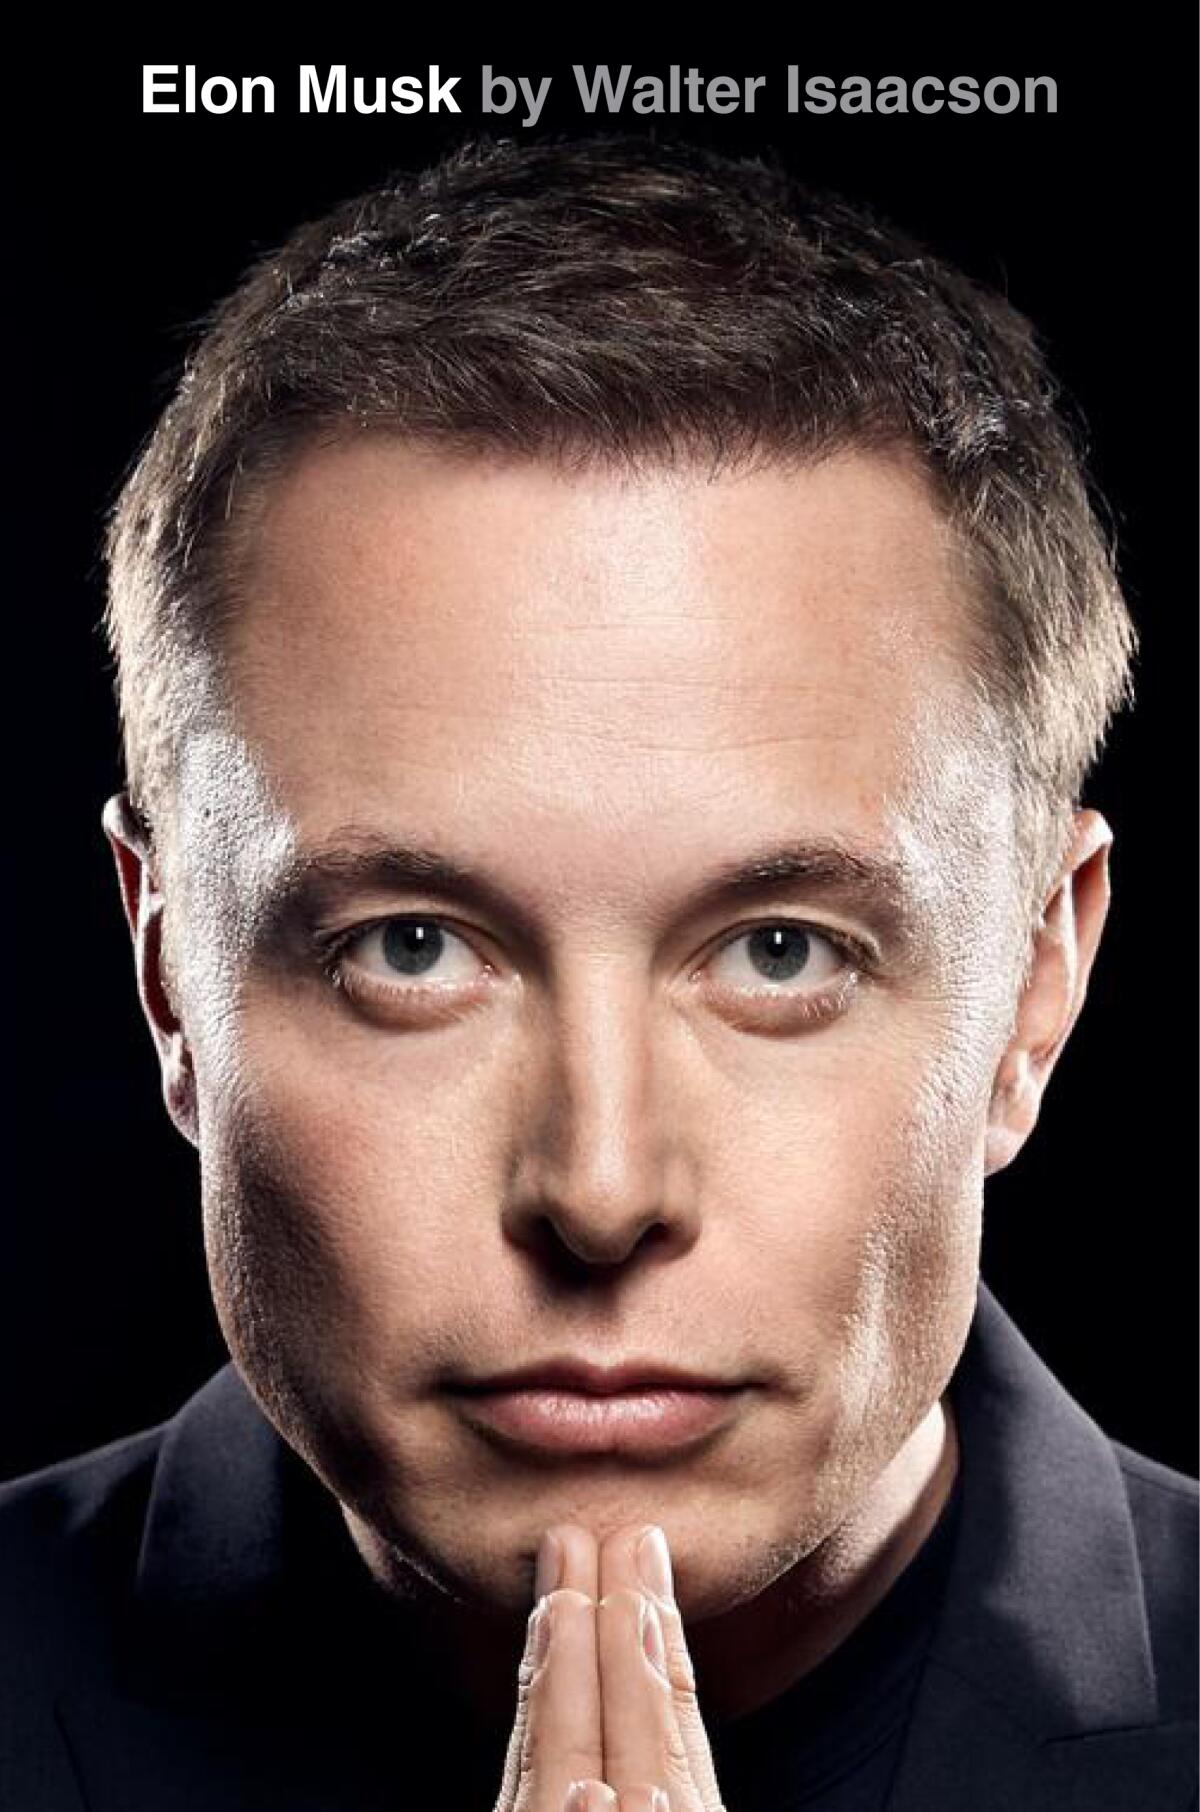 The cover of "Elon Musk," by Walter Isaacson, shows Musk head on, "prayer hands" beneath his chin